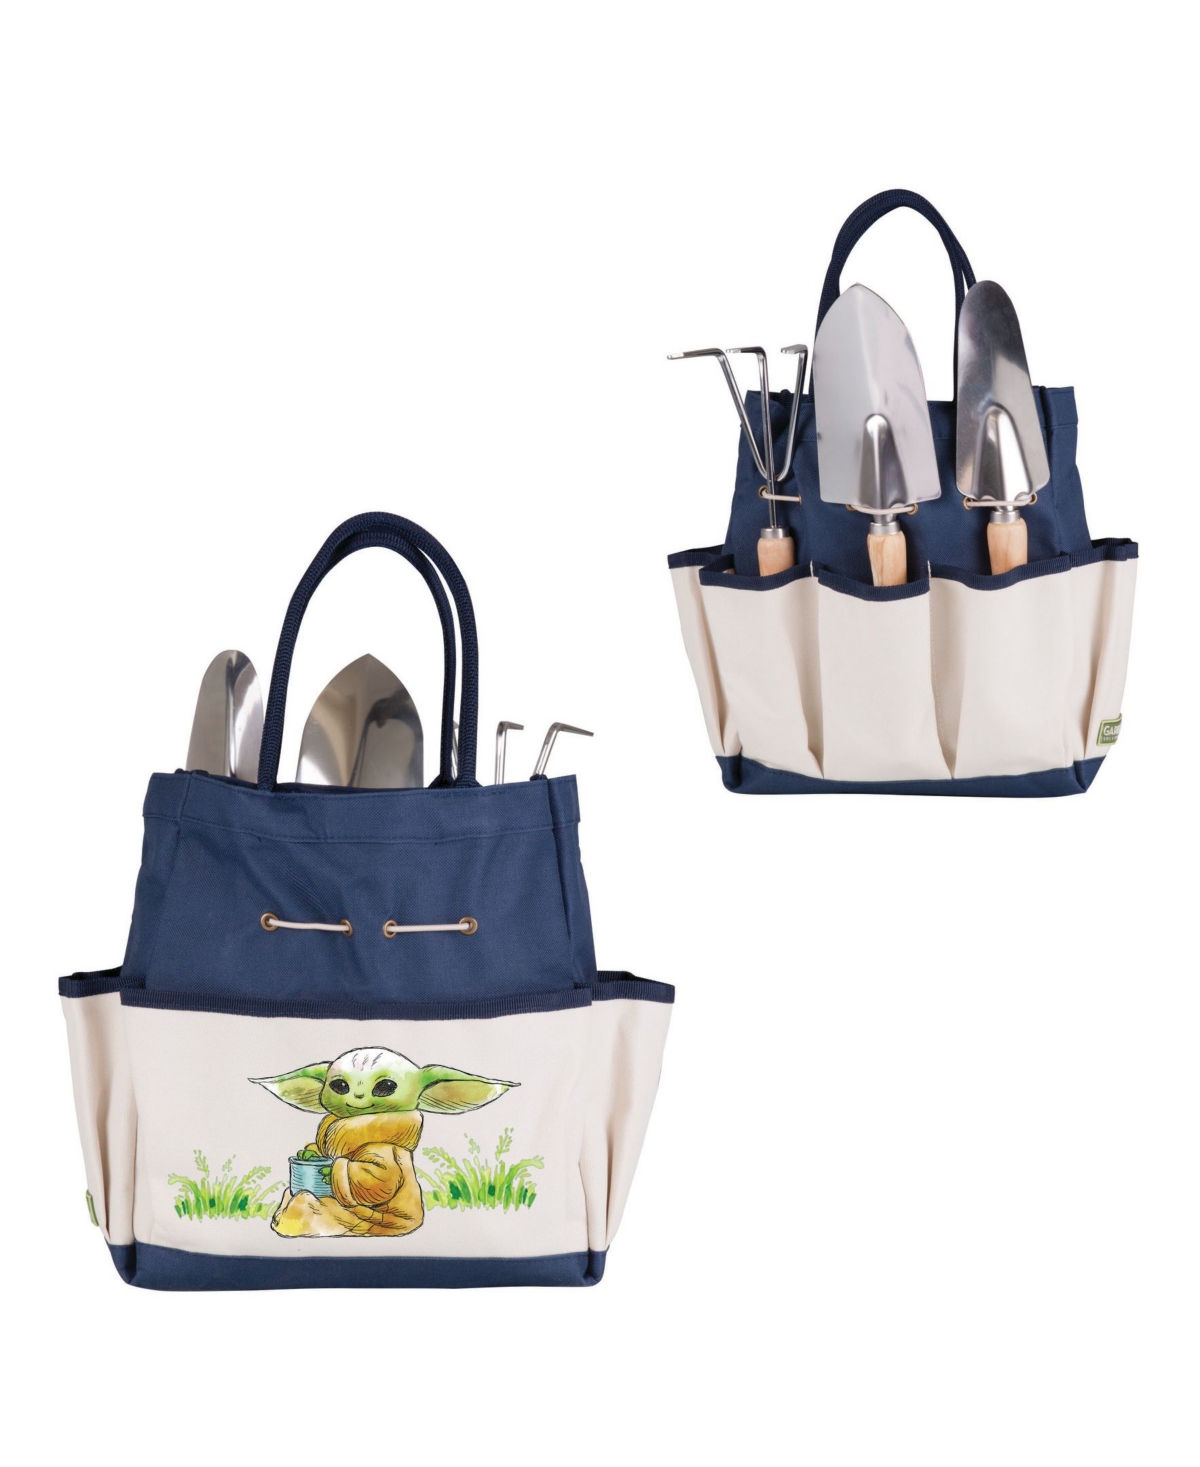 Oniva Star Wars The Child Garden Tote With Tools In Blue